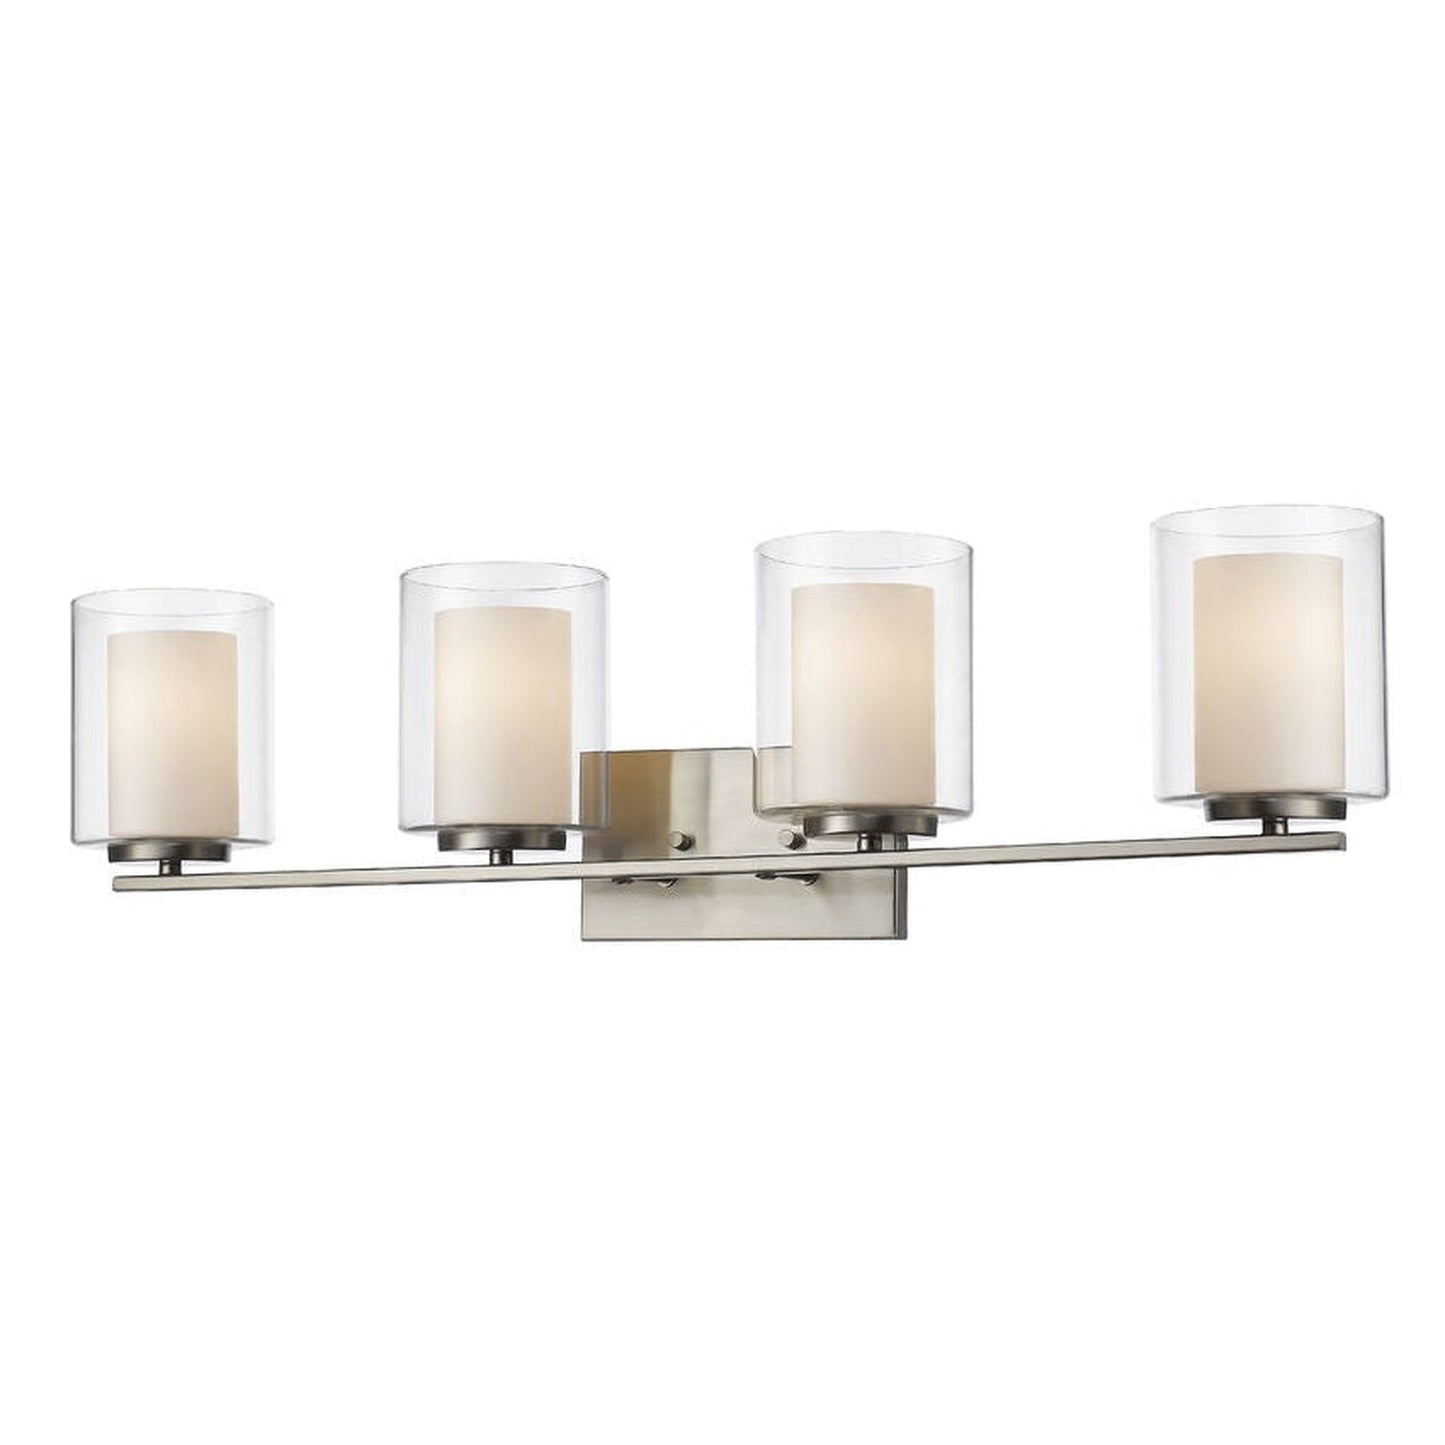 Z-Lite Willow 32" 4-Light Brushed Nickel Vanity Light With Clear and Matte Opal Glass Shade